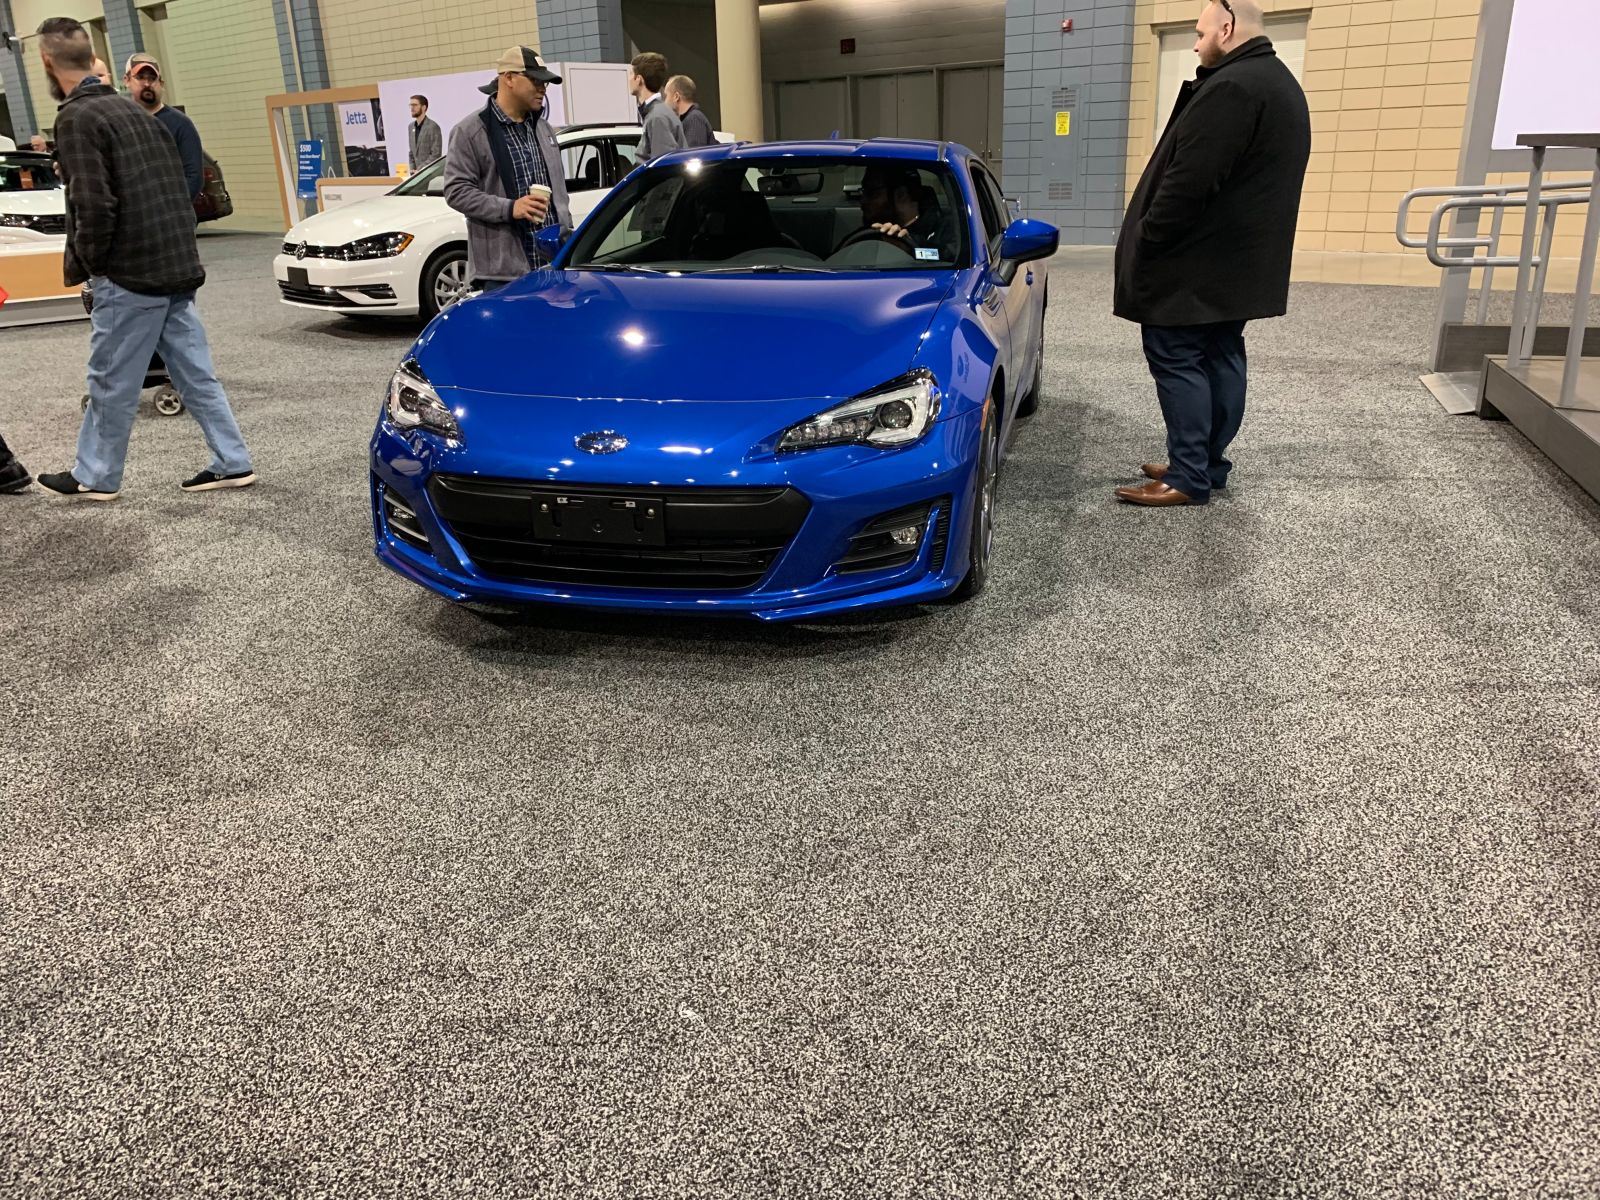 We went back over to the BRZ to compare them